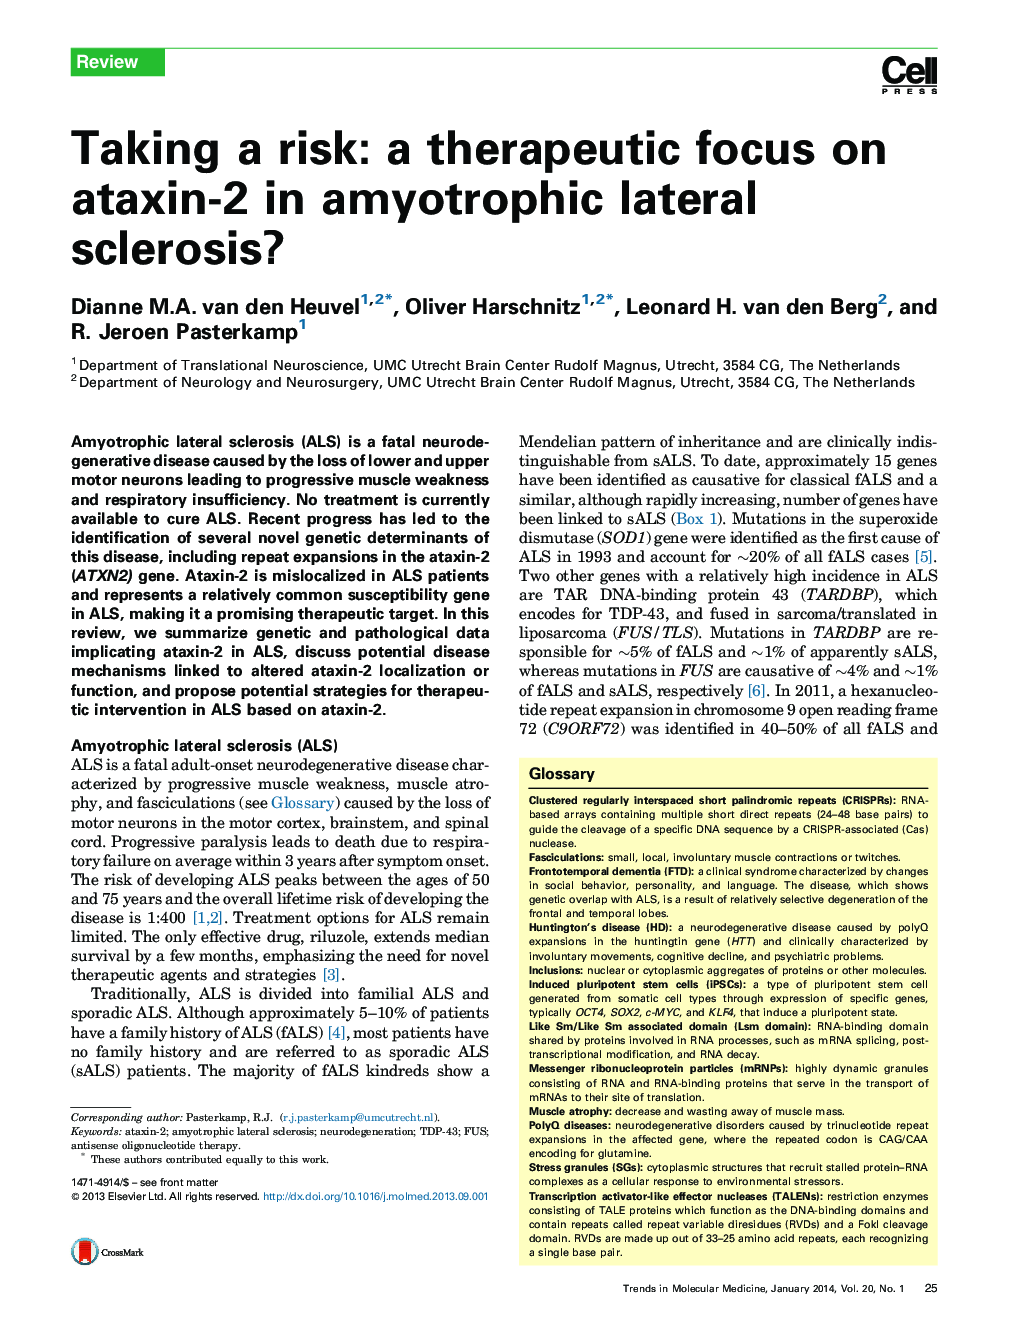 Taking a risk: a therapeutic focus on ataxin-2 in amyotrophic lateral sclerosis?